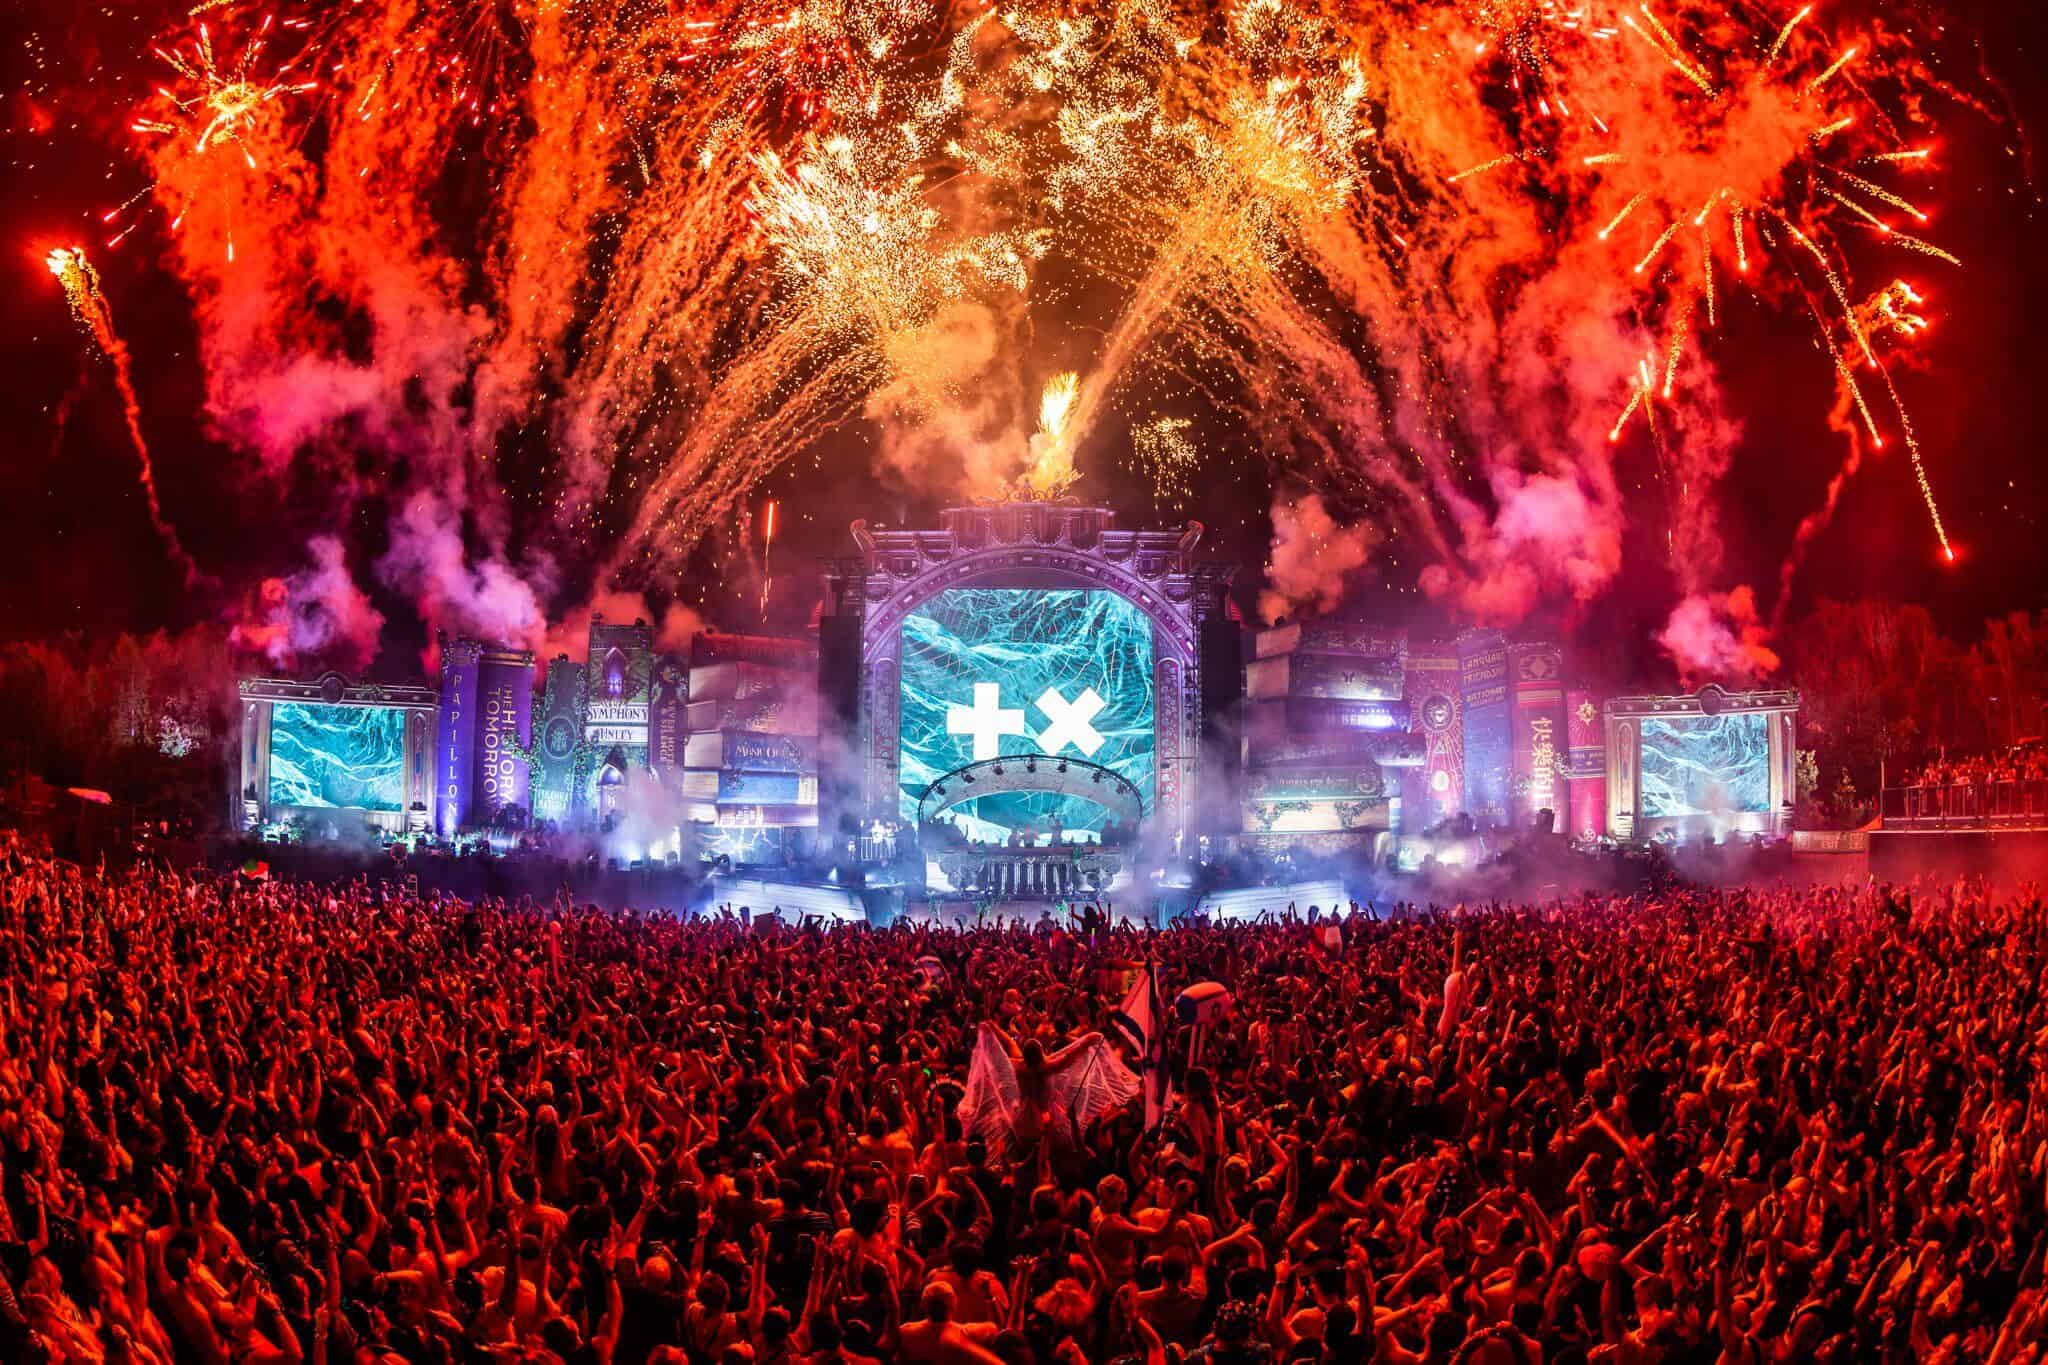 Martin Garrix hosts Tomorrowland 2022 Library Stage with his label STMPD: Watch